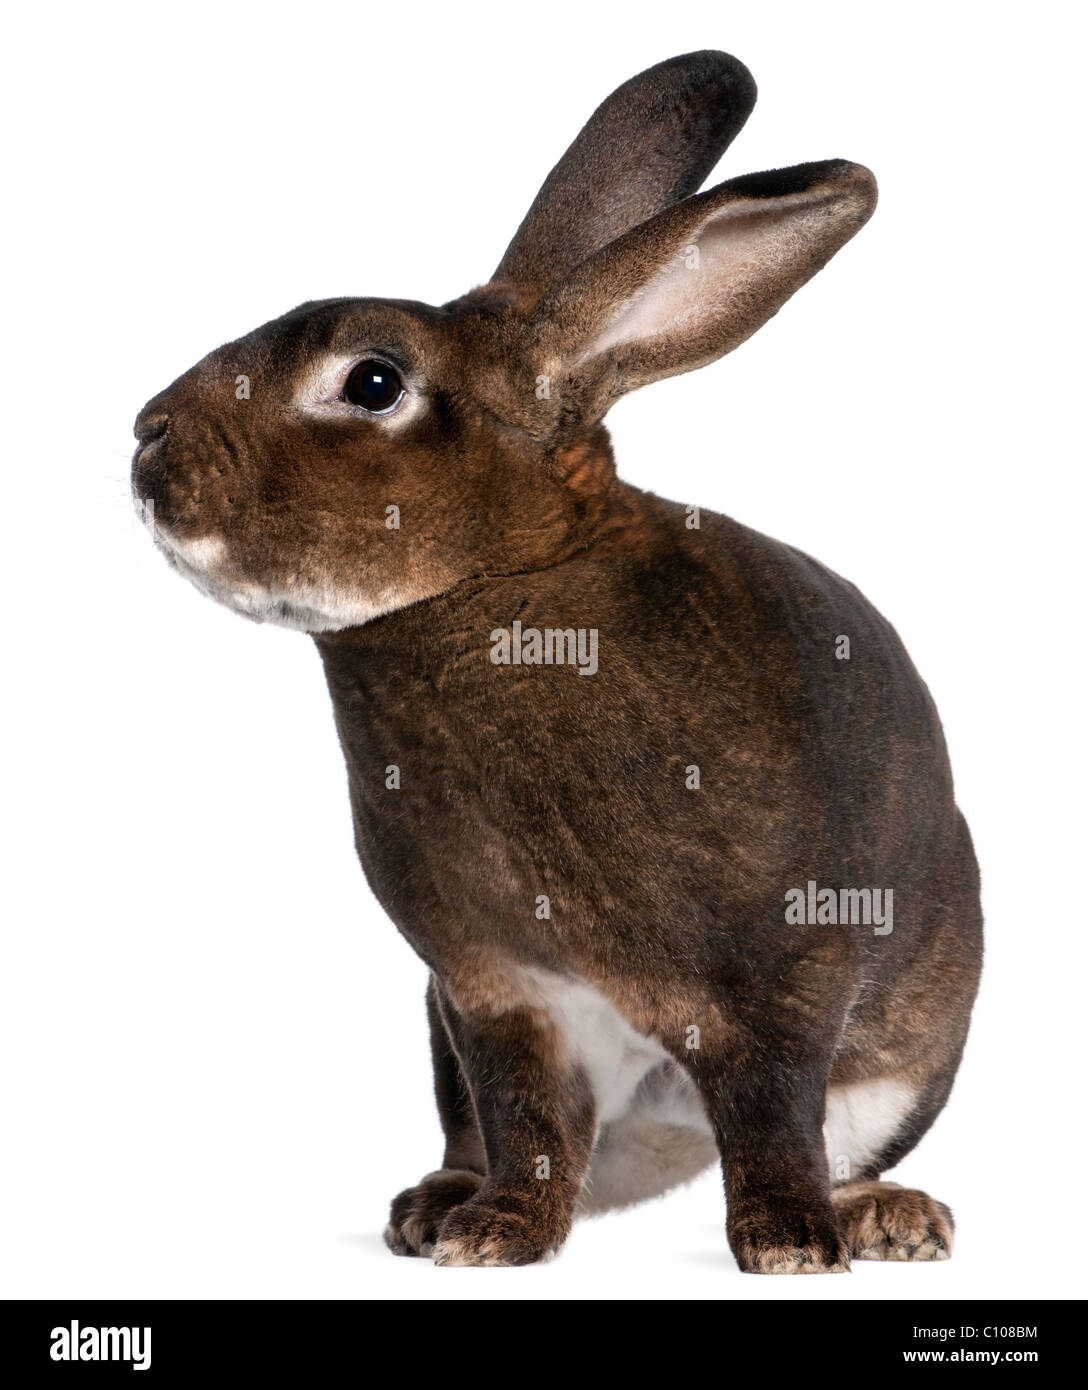 Lapin Rex Castor in front of white background Banque D'Images